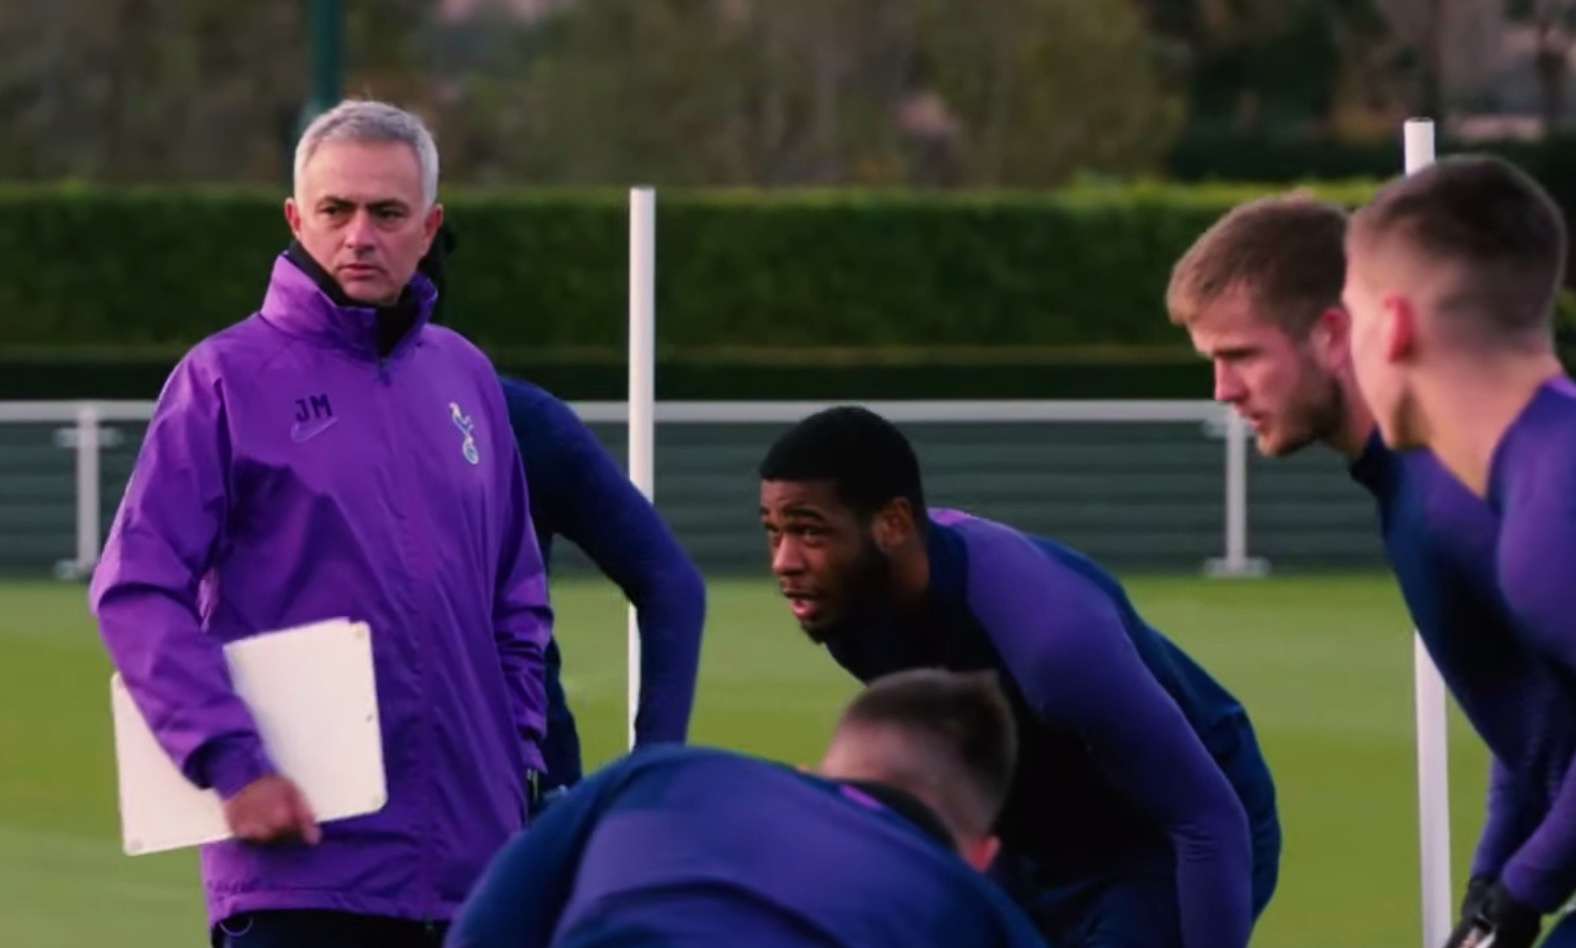 Mourinho singles out Japhet Tanganga with a Cristiano Ronaldo remark on his first day as Tottenham manager